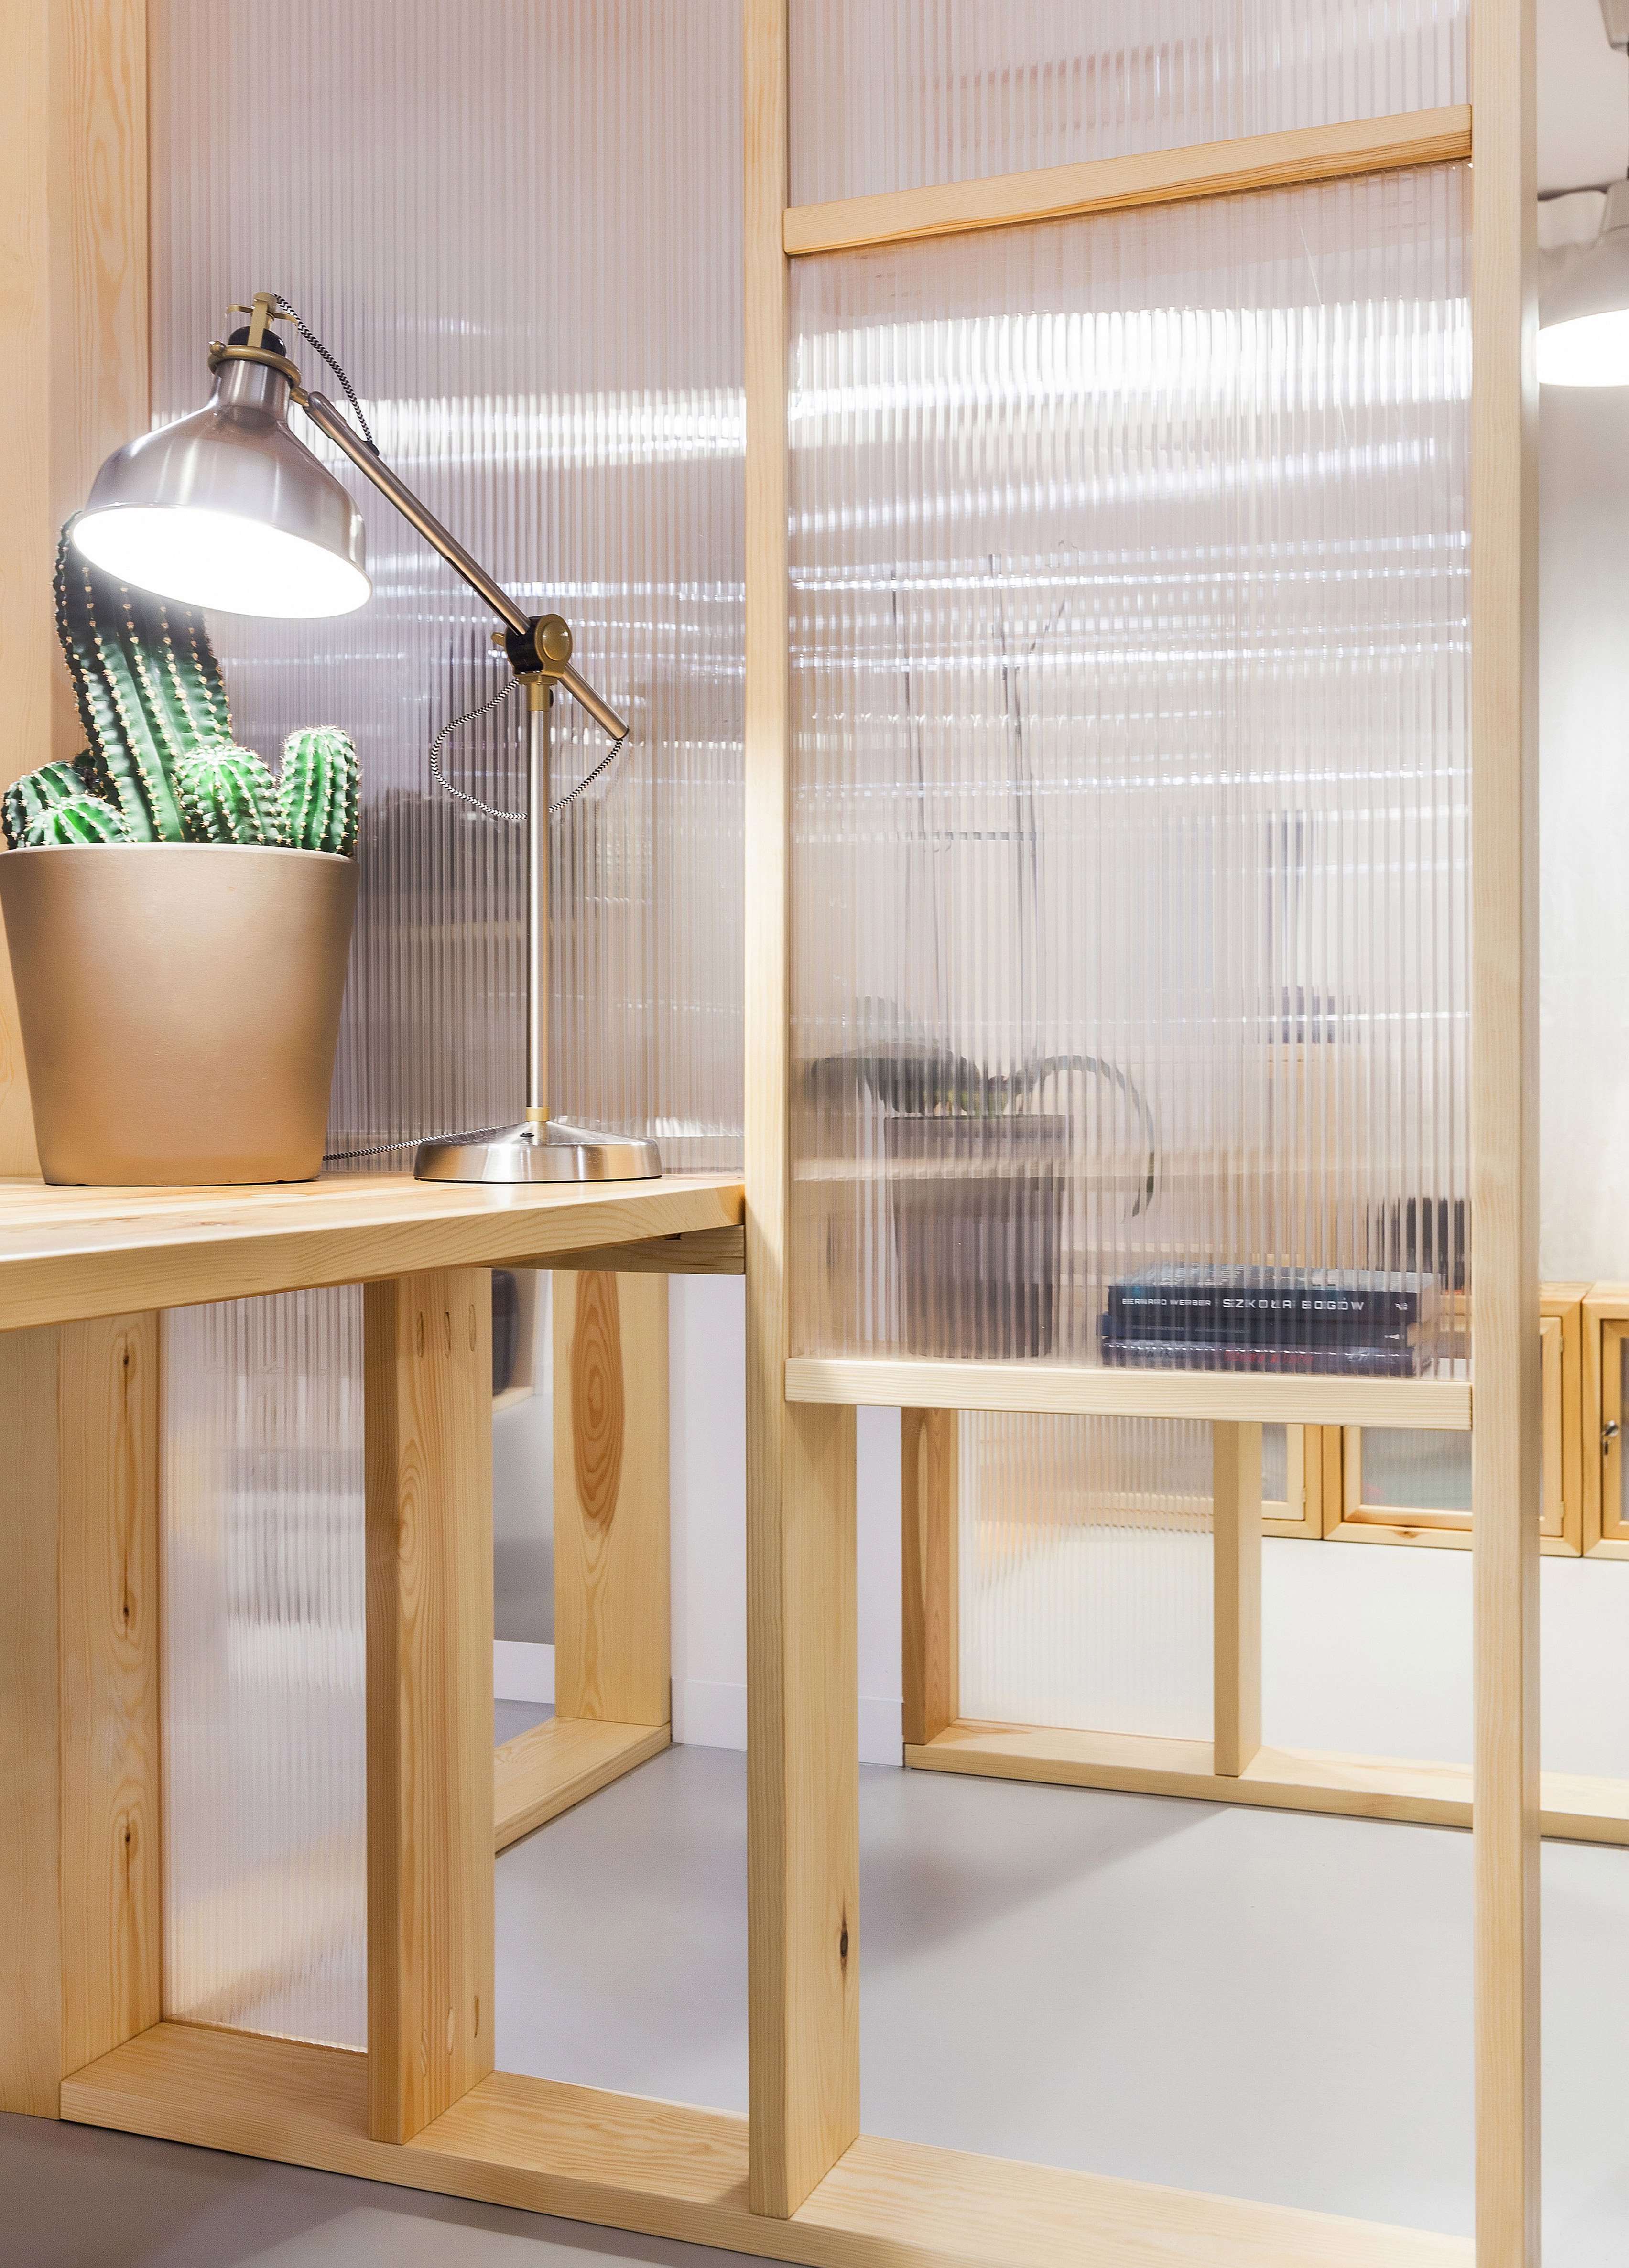 Economical workspace renovation in Warsaw by MFRMGR features semi-transparent walls